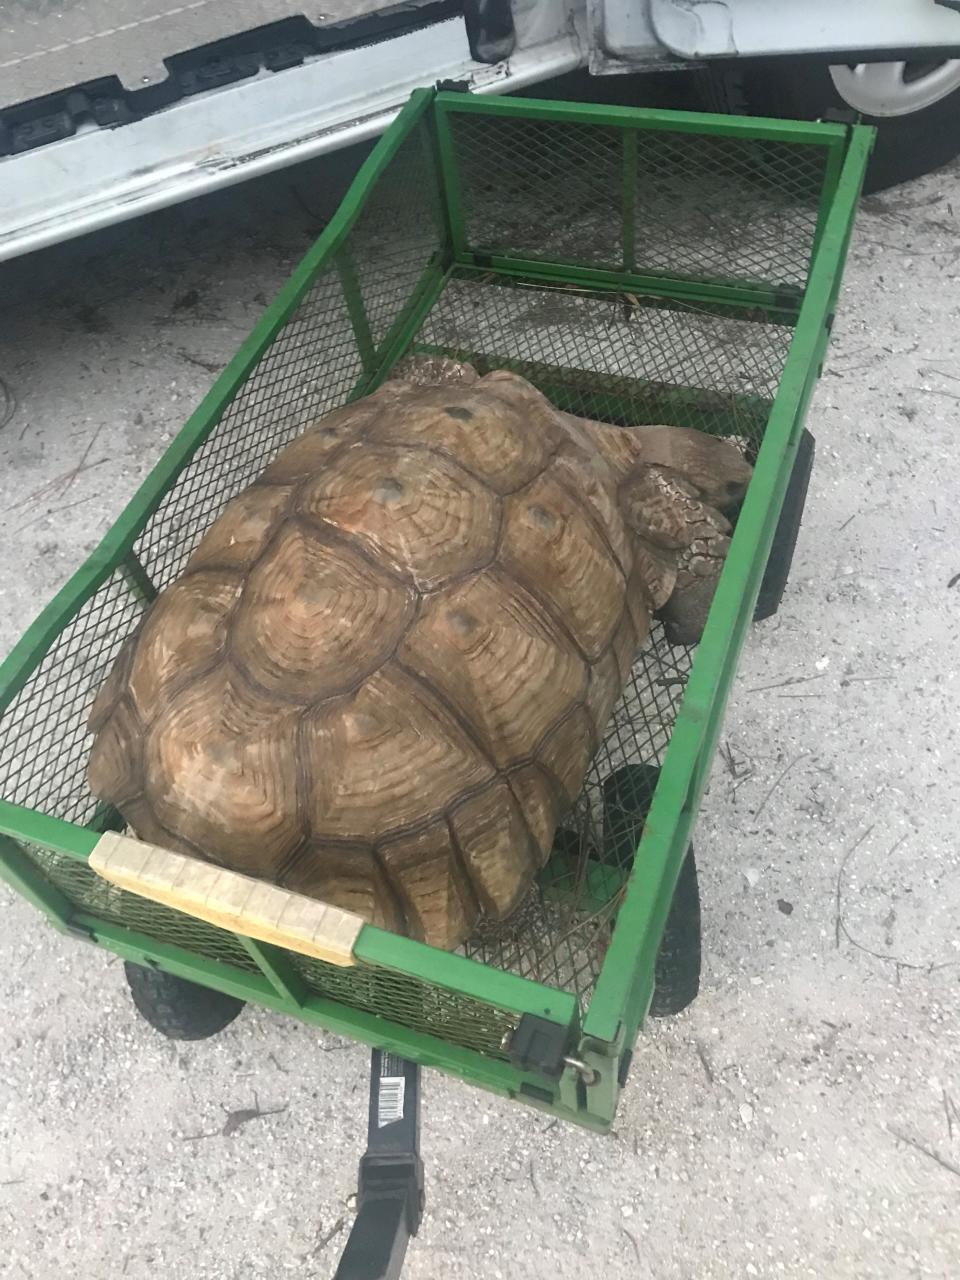 A roughly 100-pound sulcata tortoise was rescued in Martin County recently and taken to the Treasure Coast Wildlife Center in Palm City.